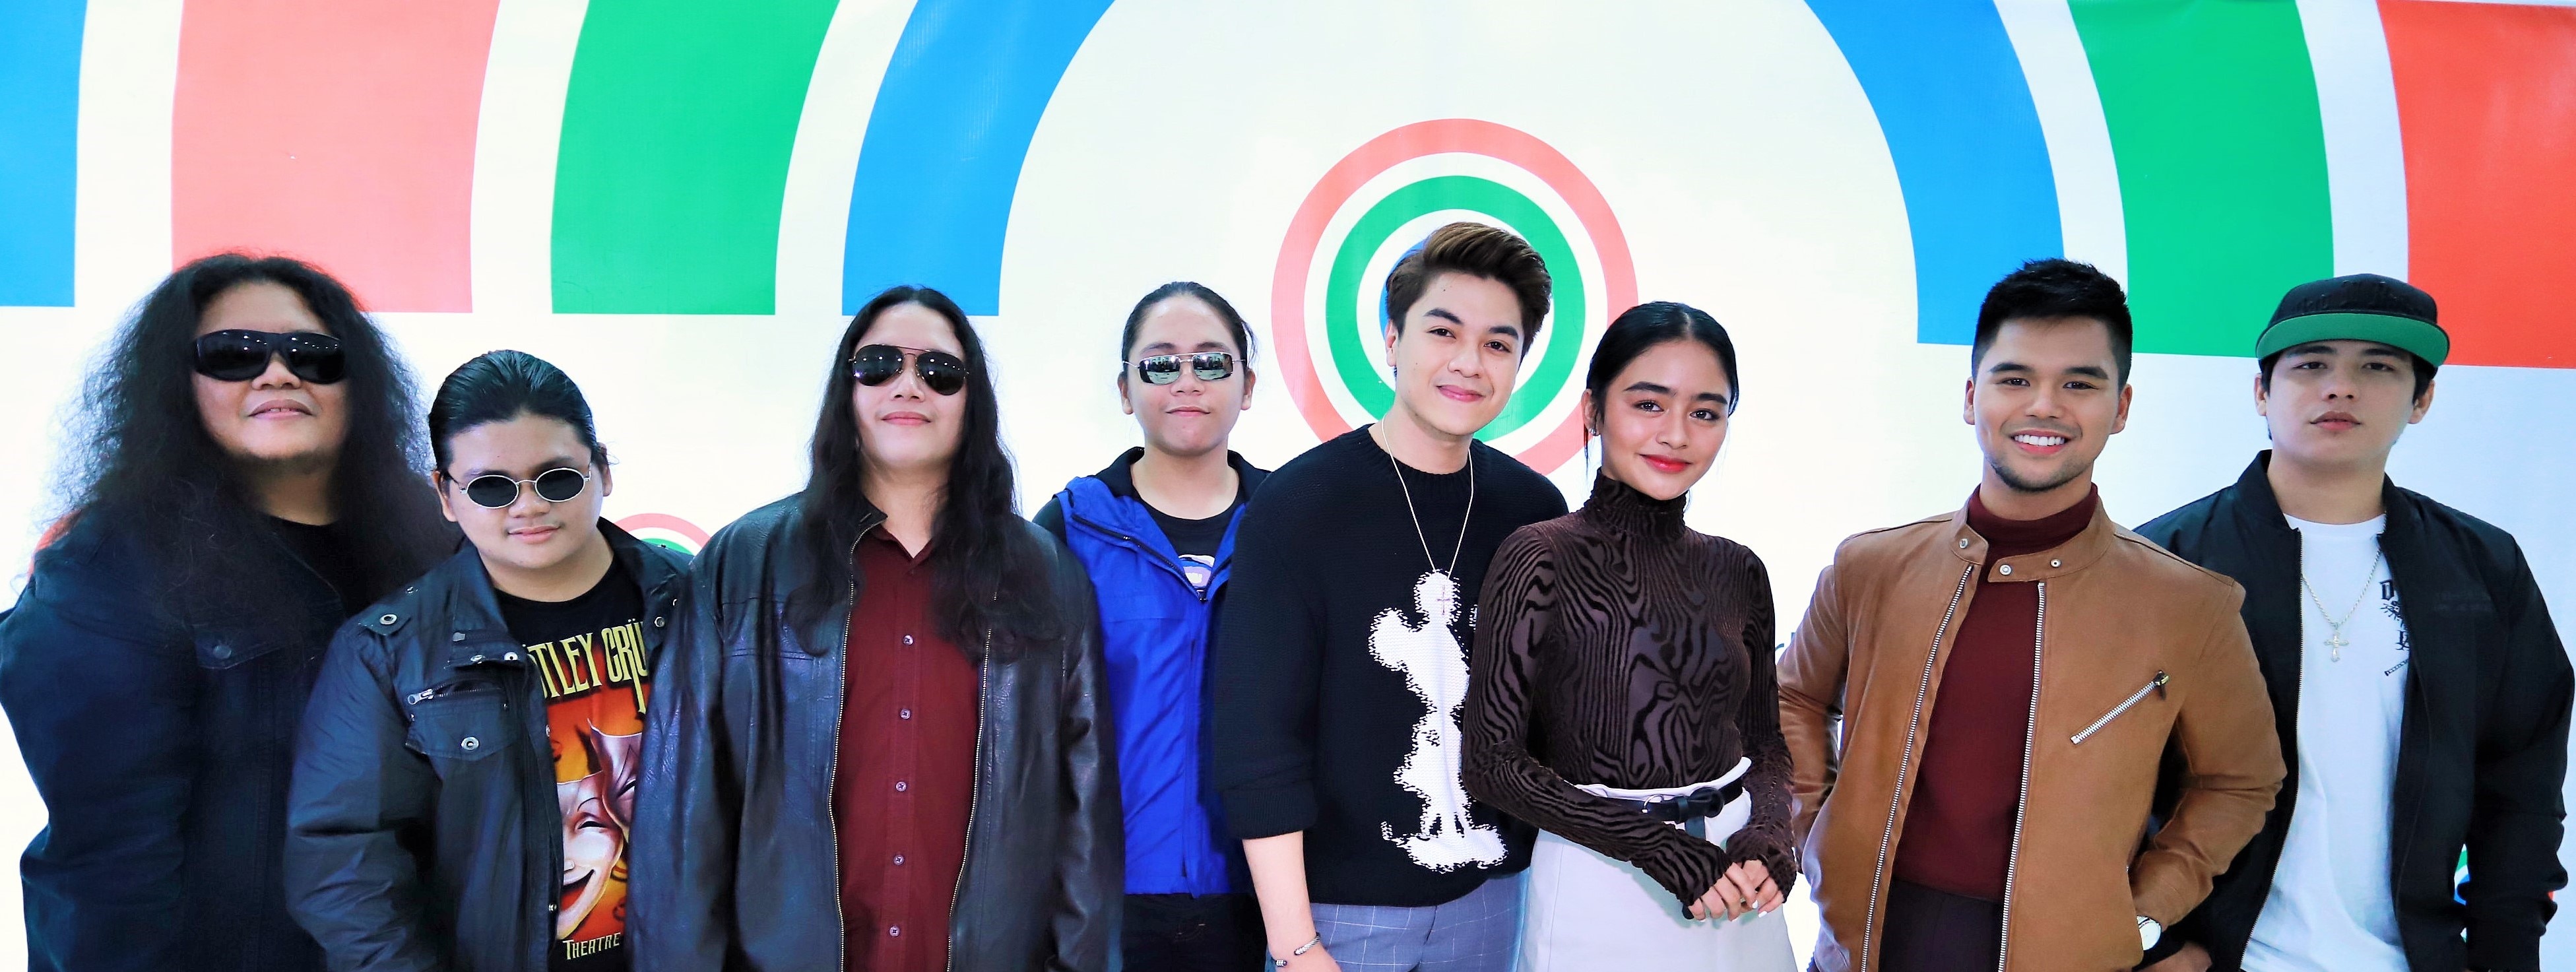 CK, JMKO, Kritiko, Solabros.com, and Vivoree ink contracts  with Star Music